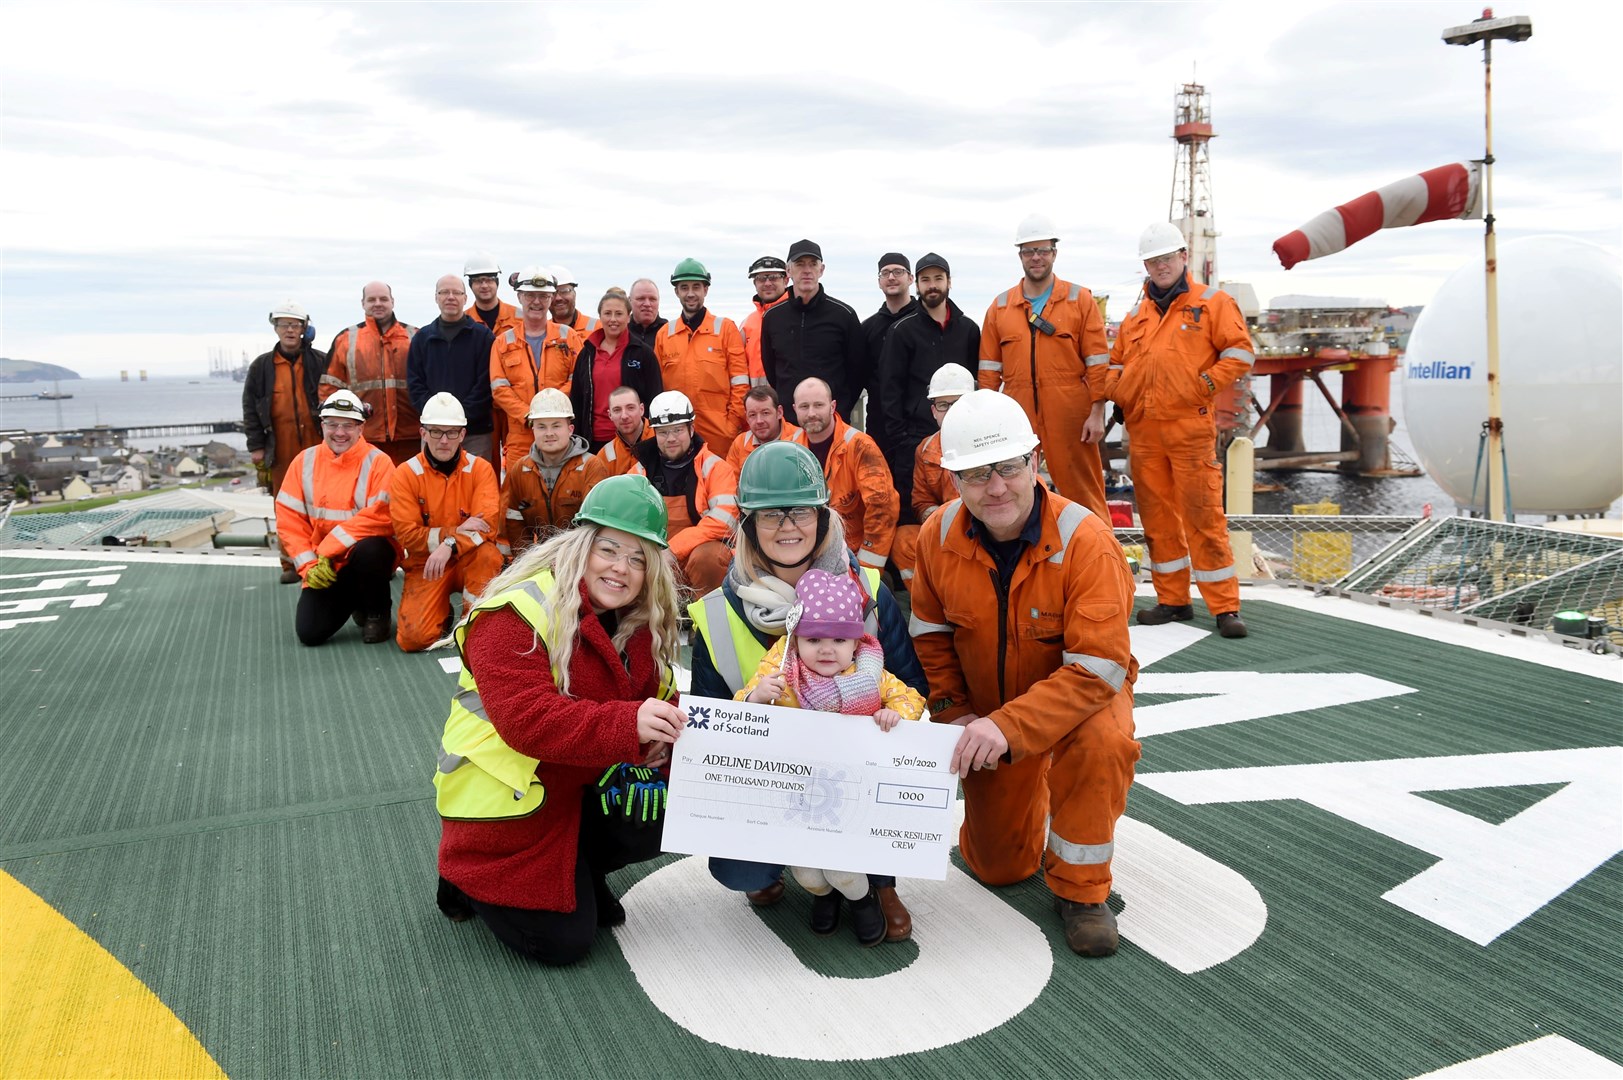 Adeline with mum Steph Davidson, granny Lorraine Davidson and Neil Spence on the helideck of the Maersk Resilient. Picture: Callum Mackay